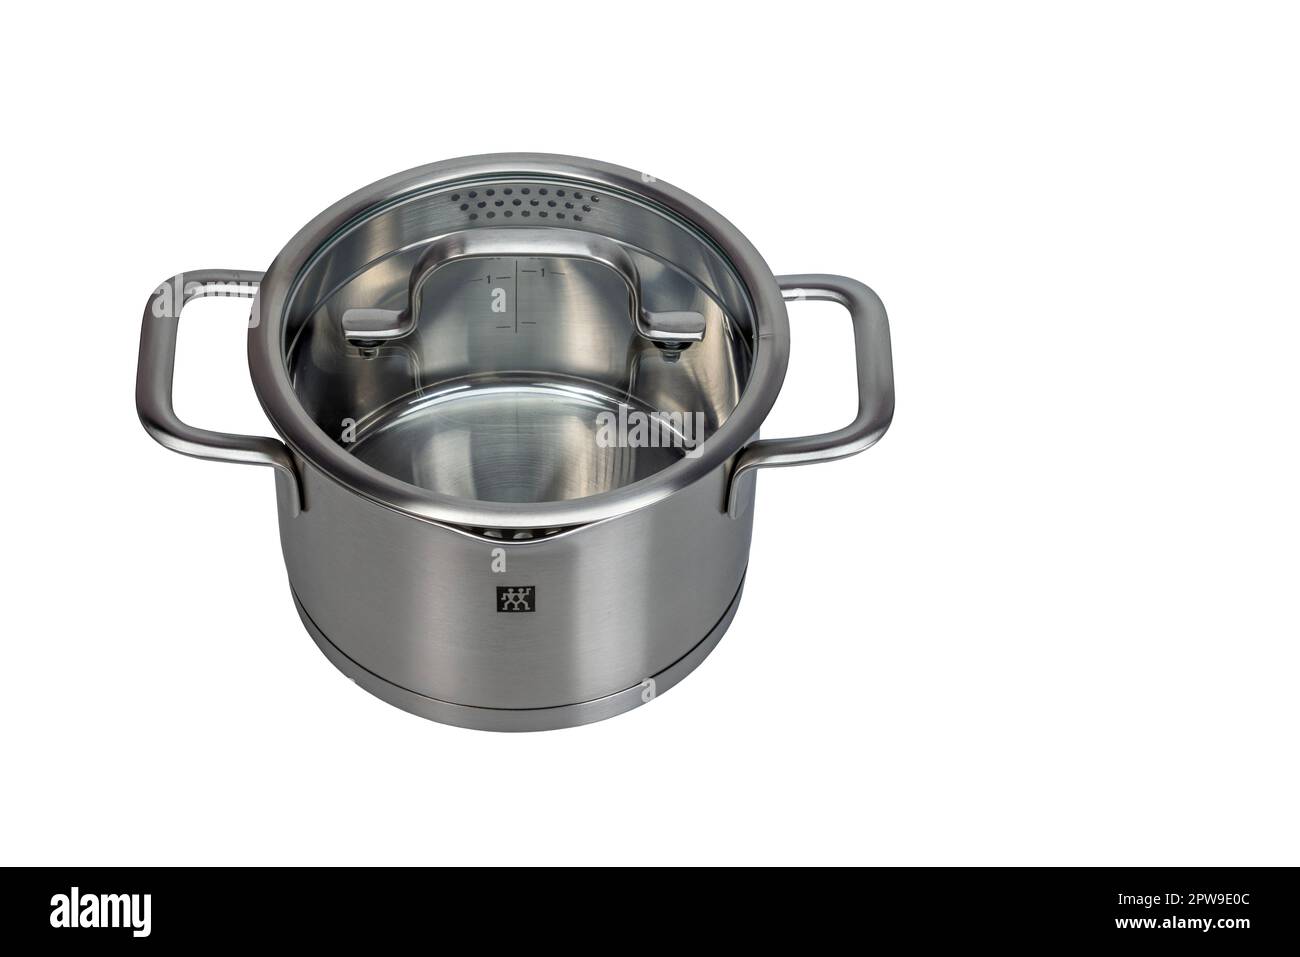 https://c8.alamy.com/comp/2PW9E0C/close-up-view-of-stainless-steel-cookware-pot-with-glass-lid-isolated-on-white-background-sweden-2PW9E0C.jpg